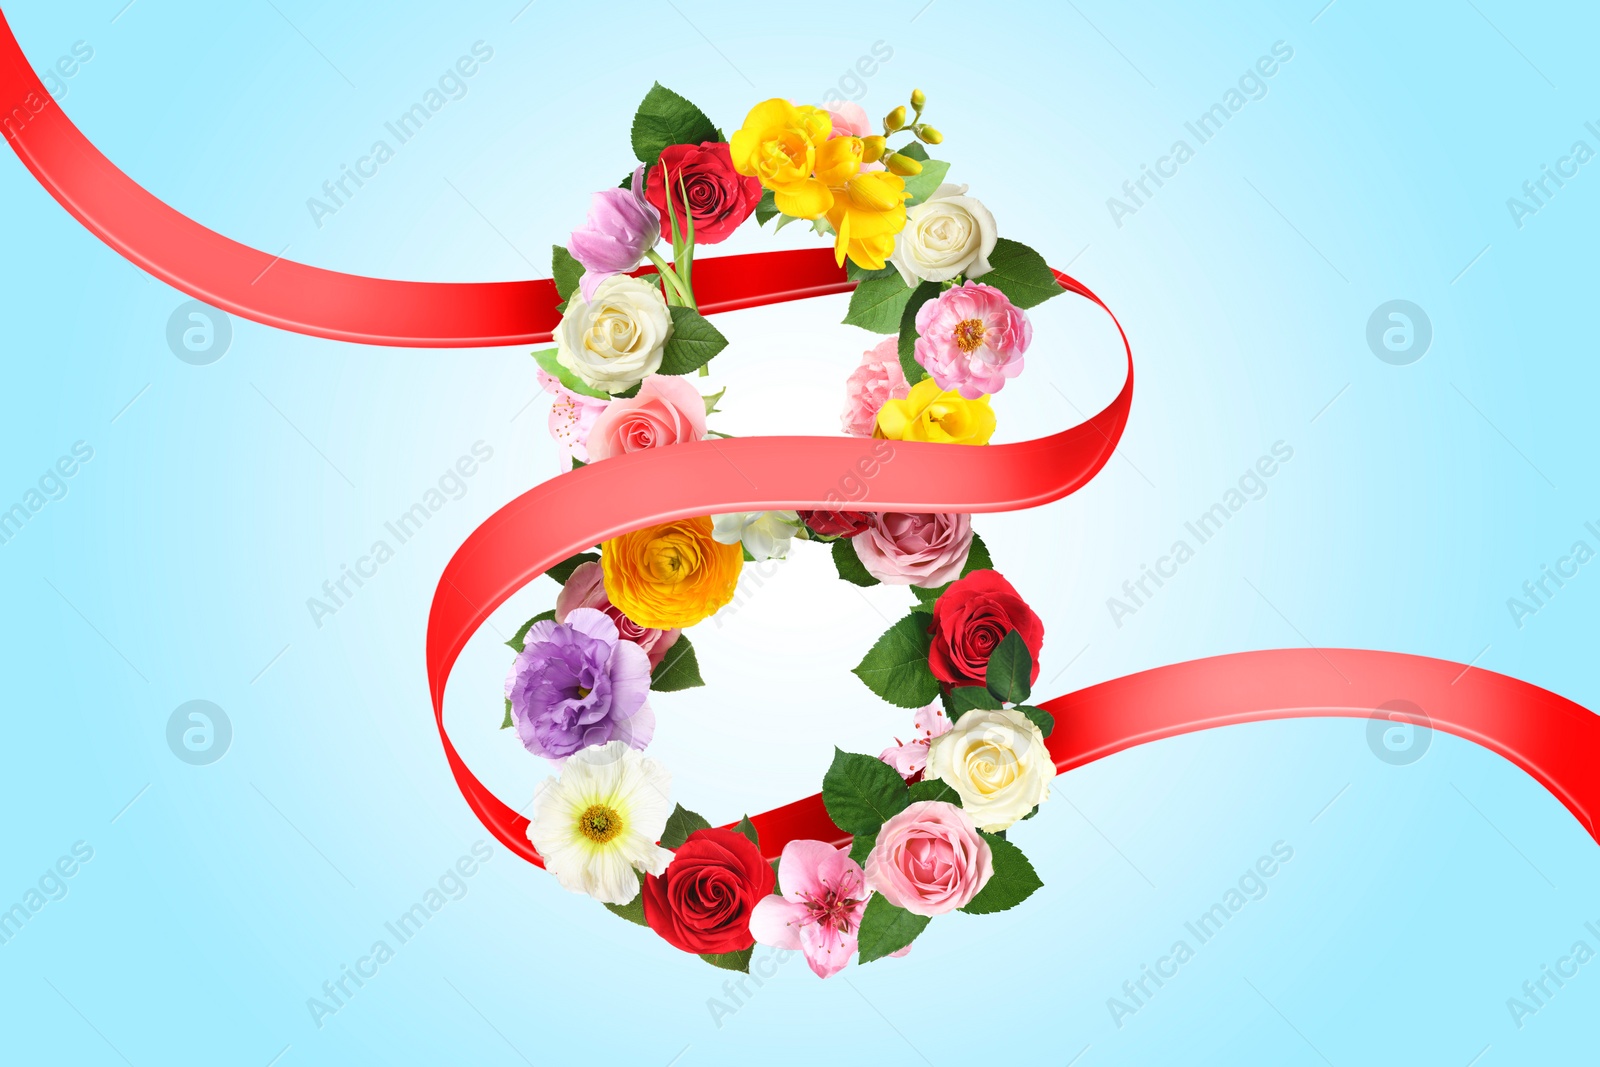 Image of International Women's Day - March 8. Card design with number 8 of bright flowers and ribbon on light blue background